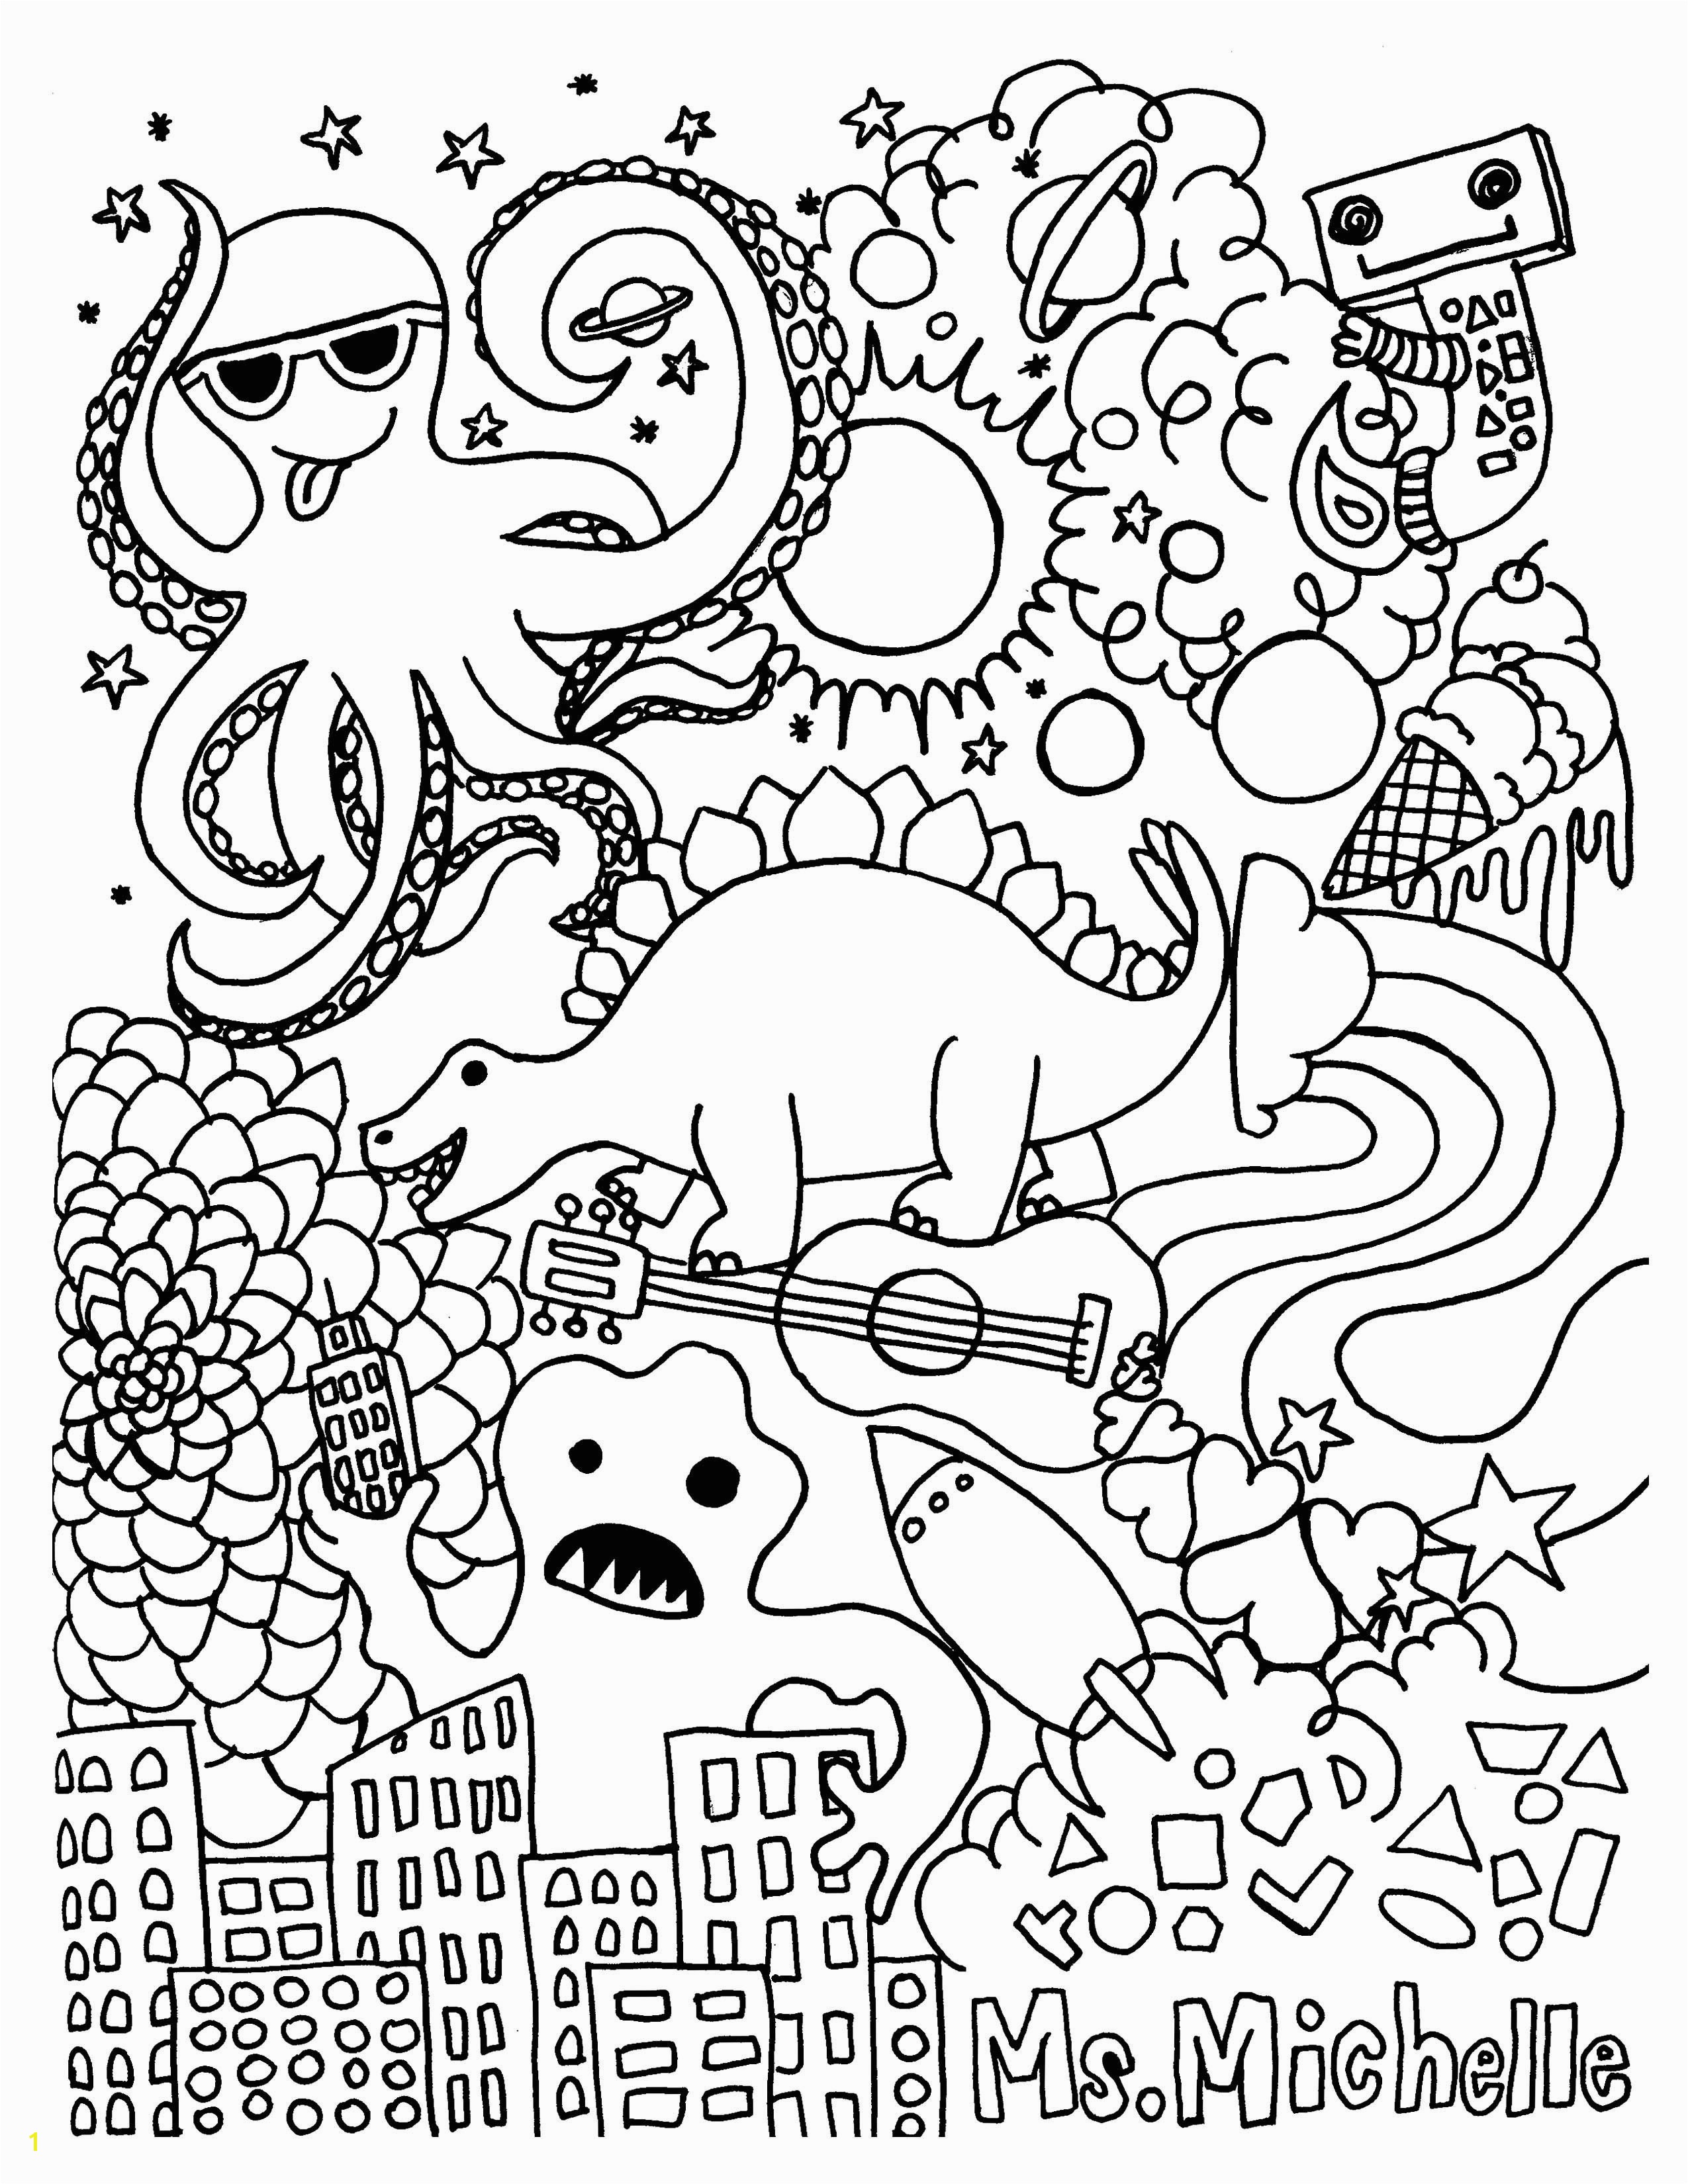 Lego Lone Ranger Coloring Pages Lego Lone Ranger Coloring Pages Free Coloring Pages Splatoon Sketch